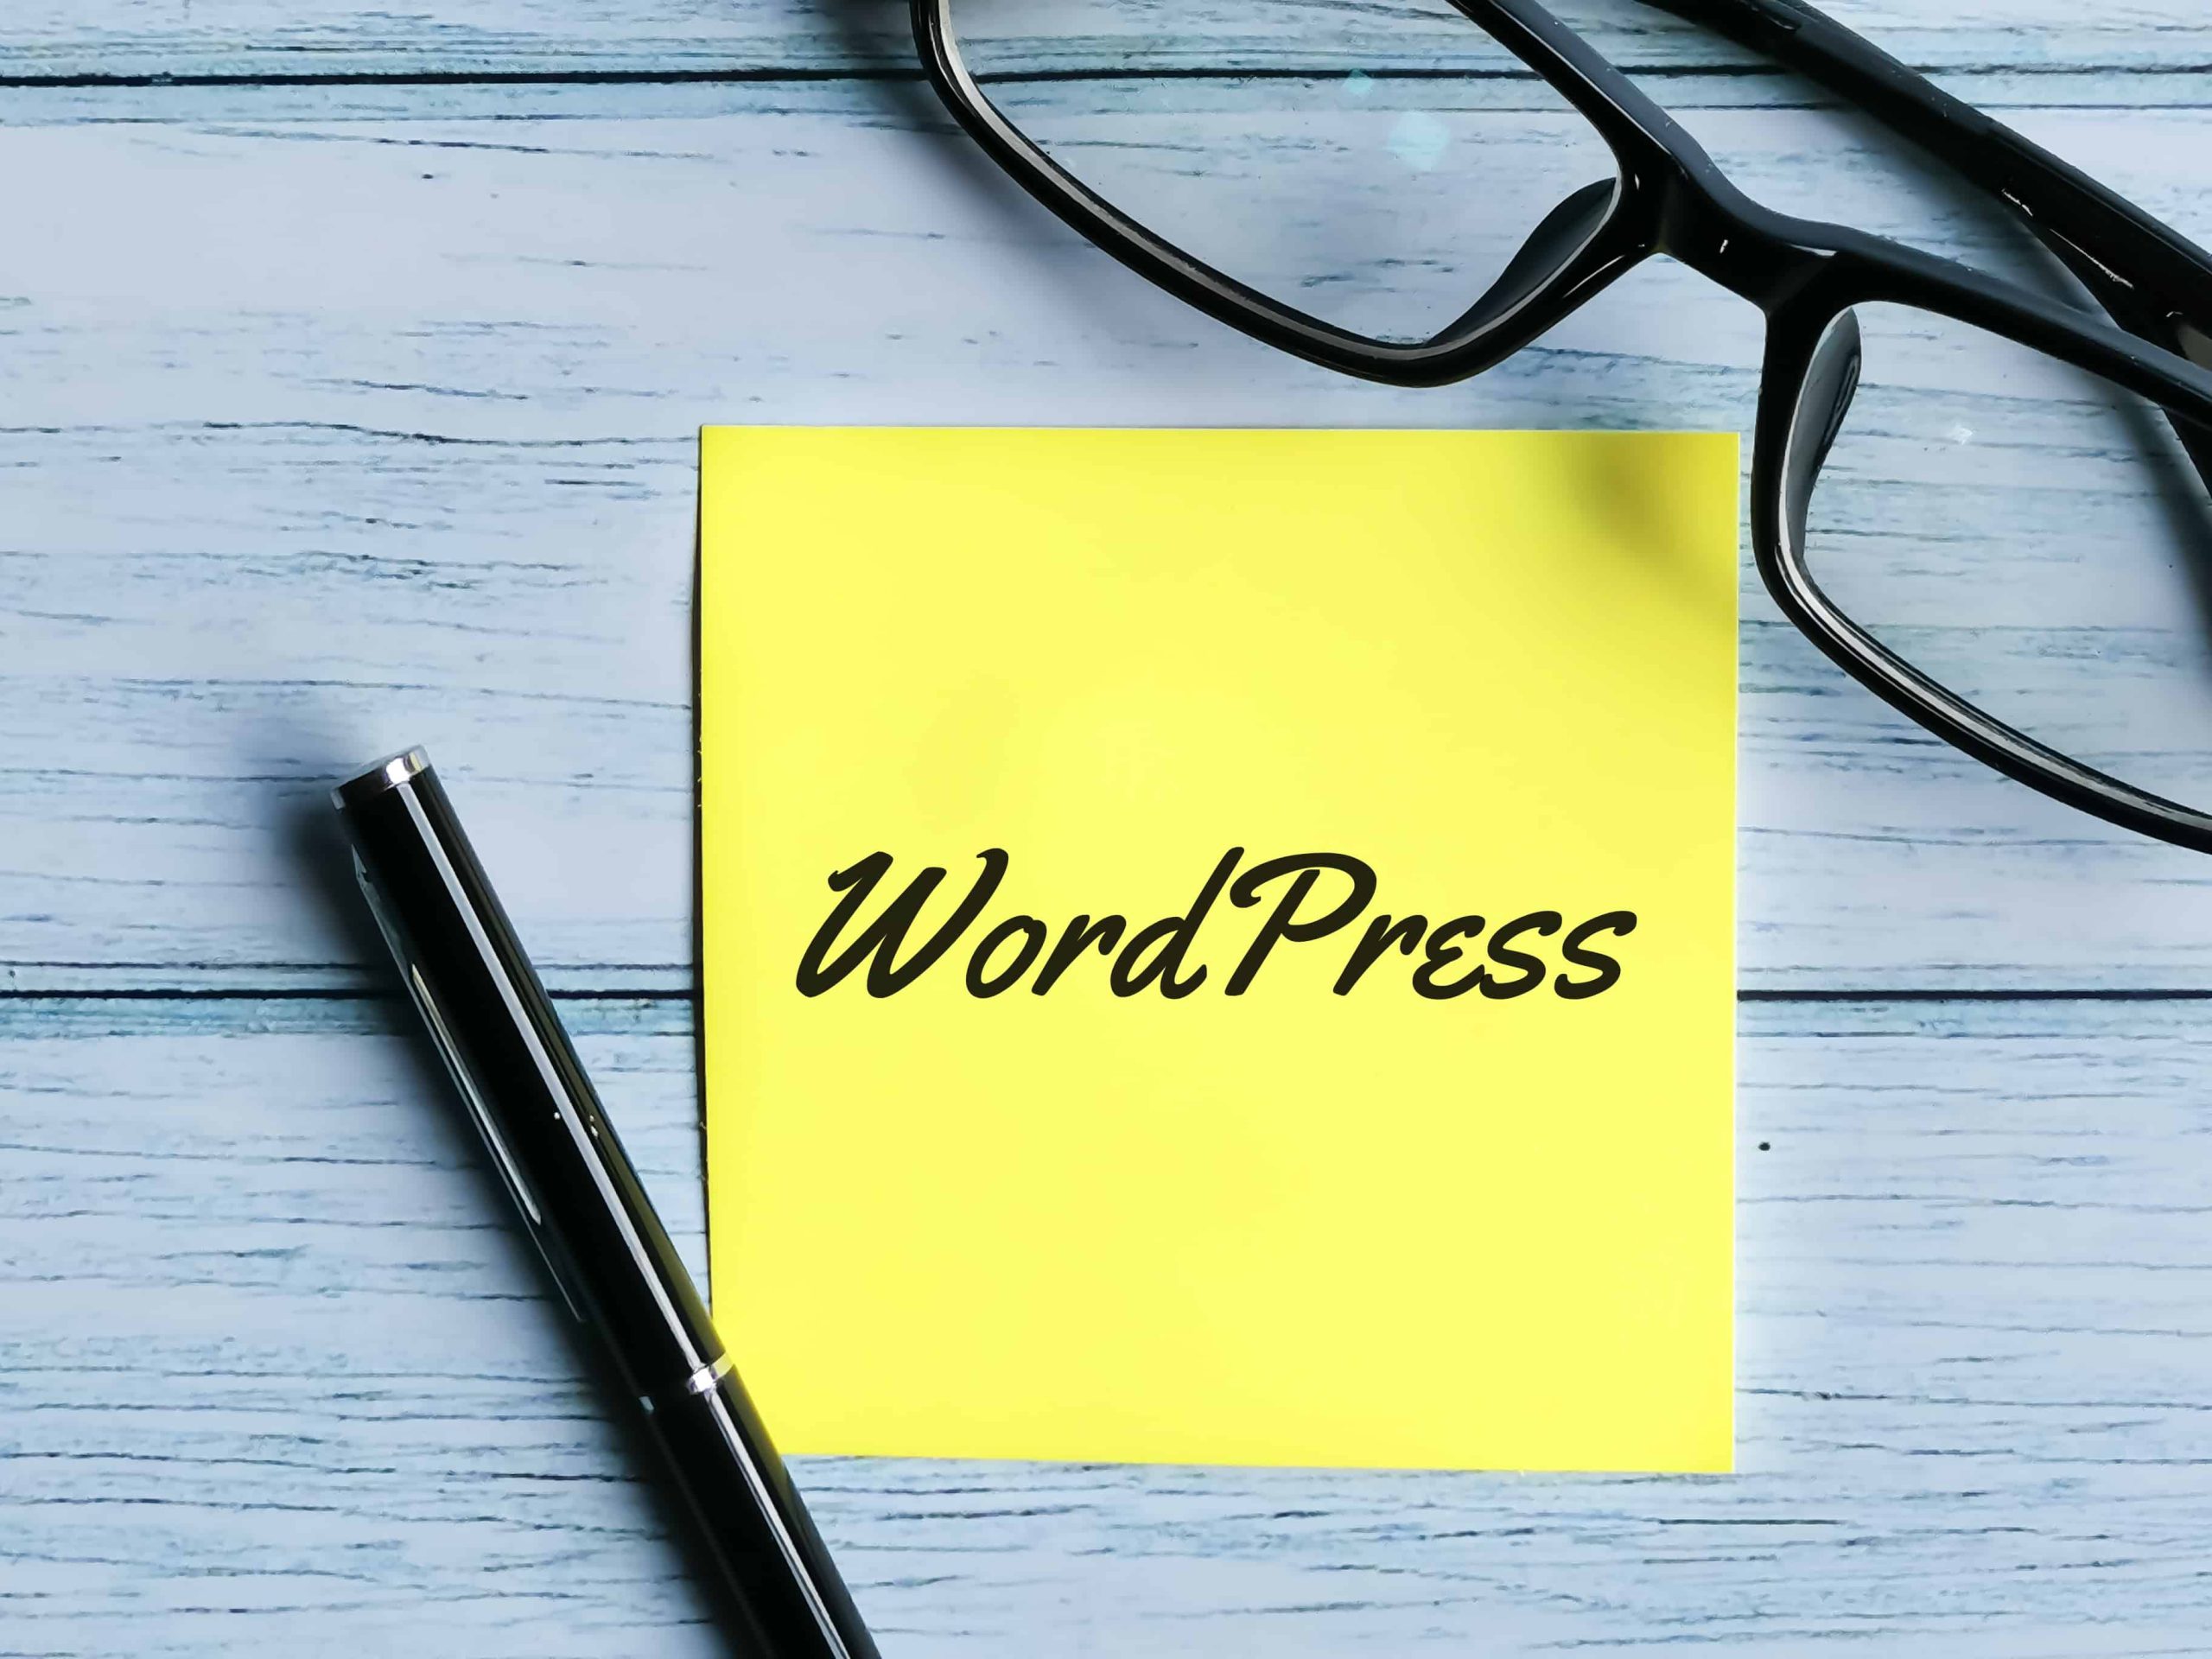 Advantages of Using WordPress Over Wix and GoDaddy